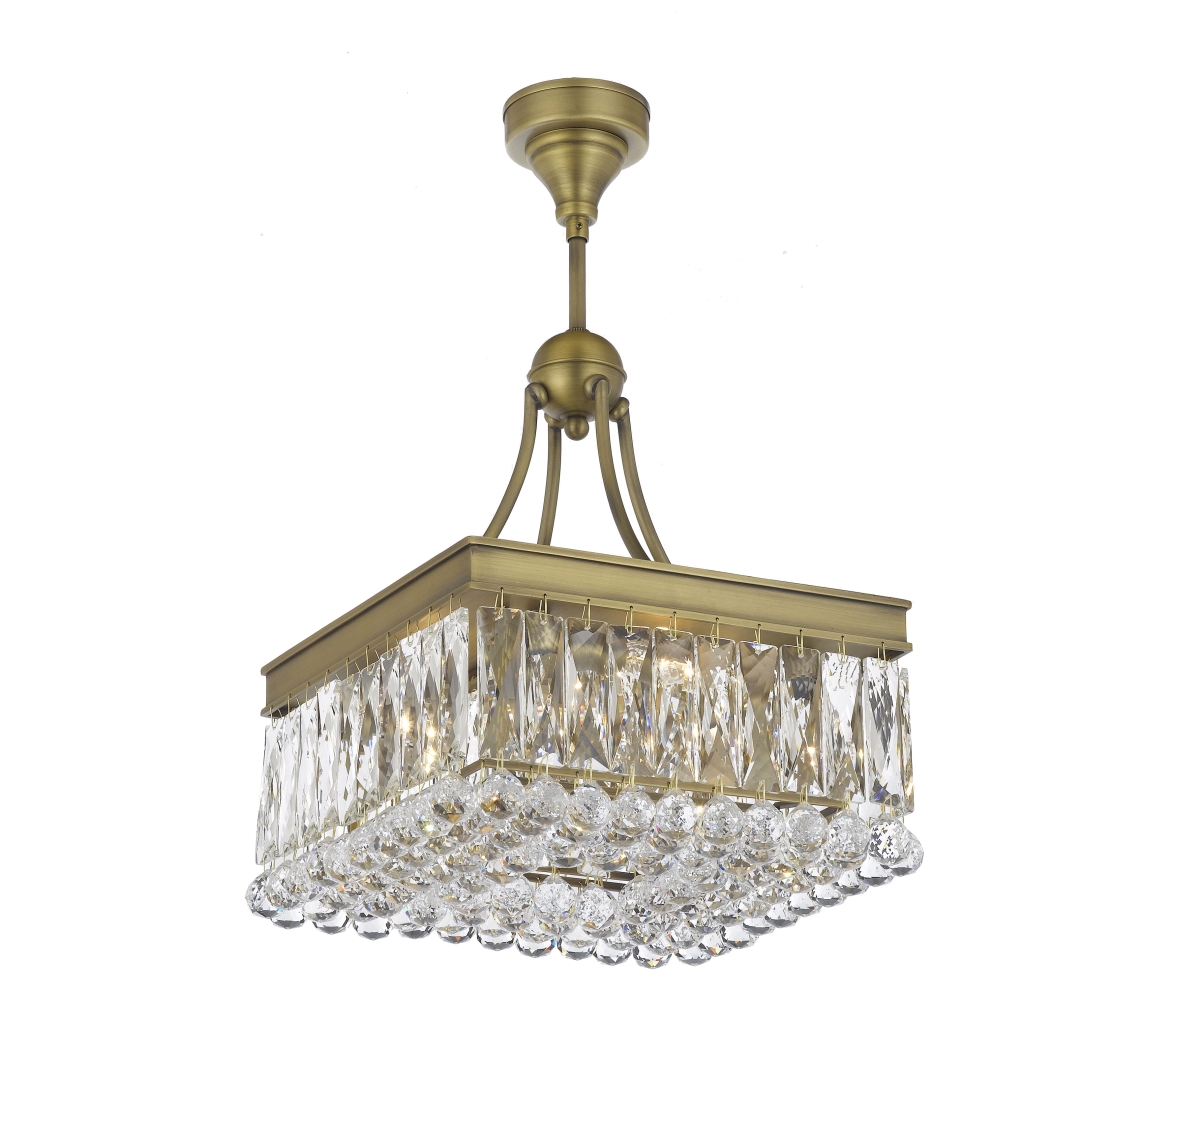 Pwg Lighting 2904-14-ac 14 In. Valencia Hanging Chandelier With Heirloom Grandcut Crystals - Antique Copper